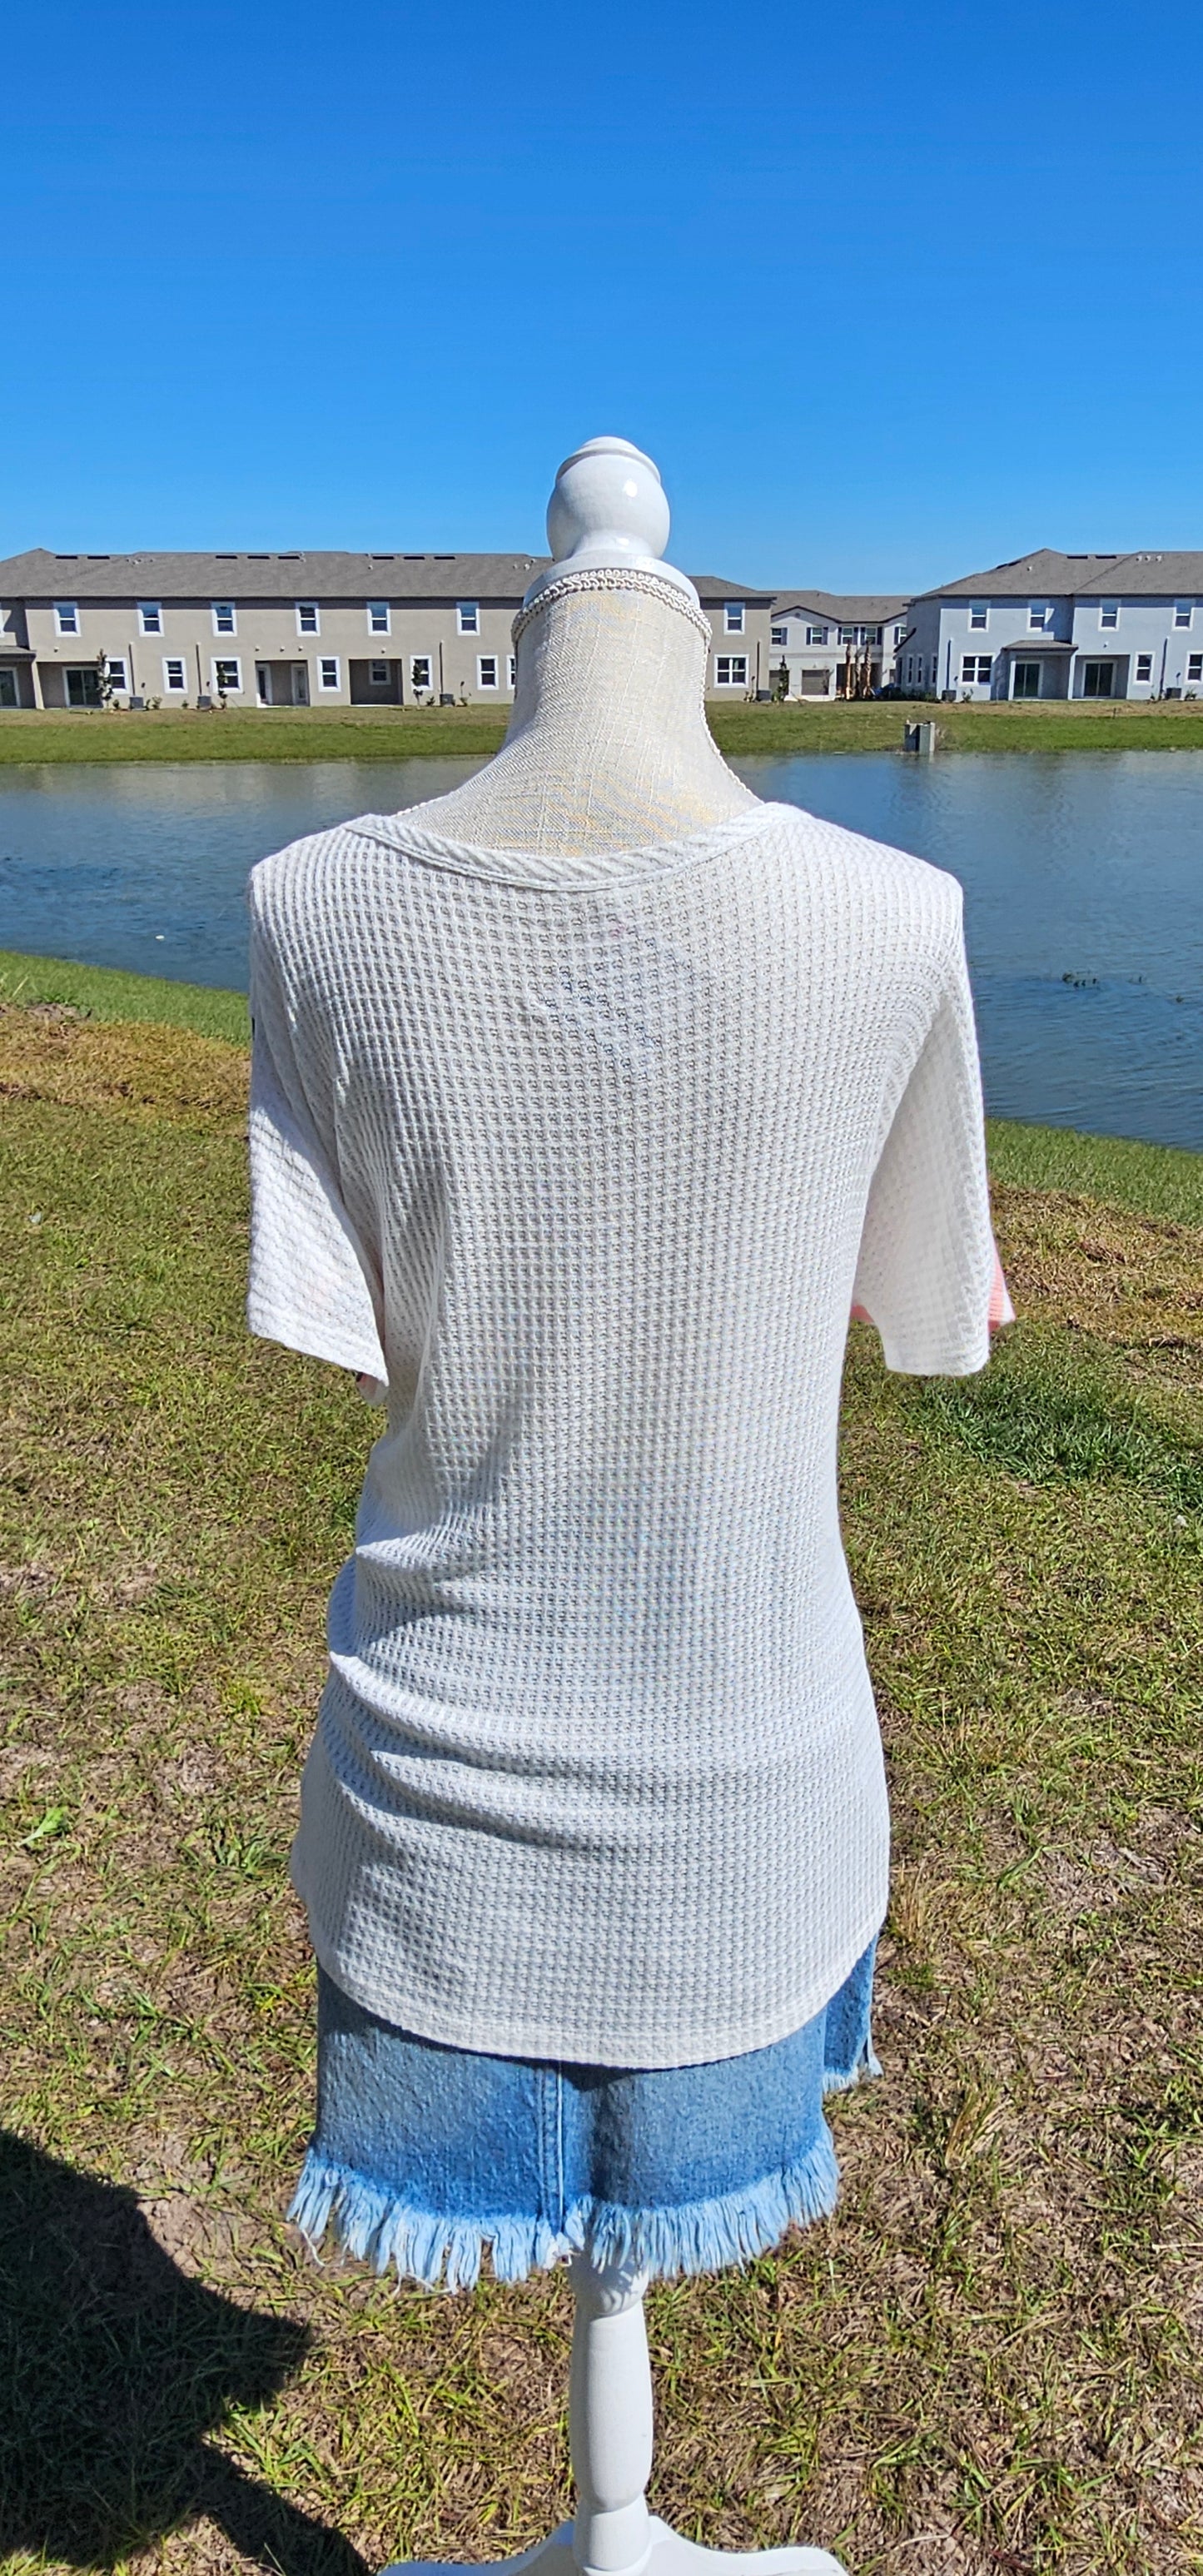 “Spoken From The Heart” is a comfy and casual t-shirt! This short sleeve shirt features pattern blocking, leopard print (pink, gray, white), stripes (coral, white) and solid waffle (white). This shirt has three different materials and textures, and a rounded neckline. Pair with your favorite pair of denim jeans, shorts, or skirt. Sizes small through large.